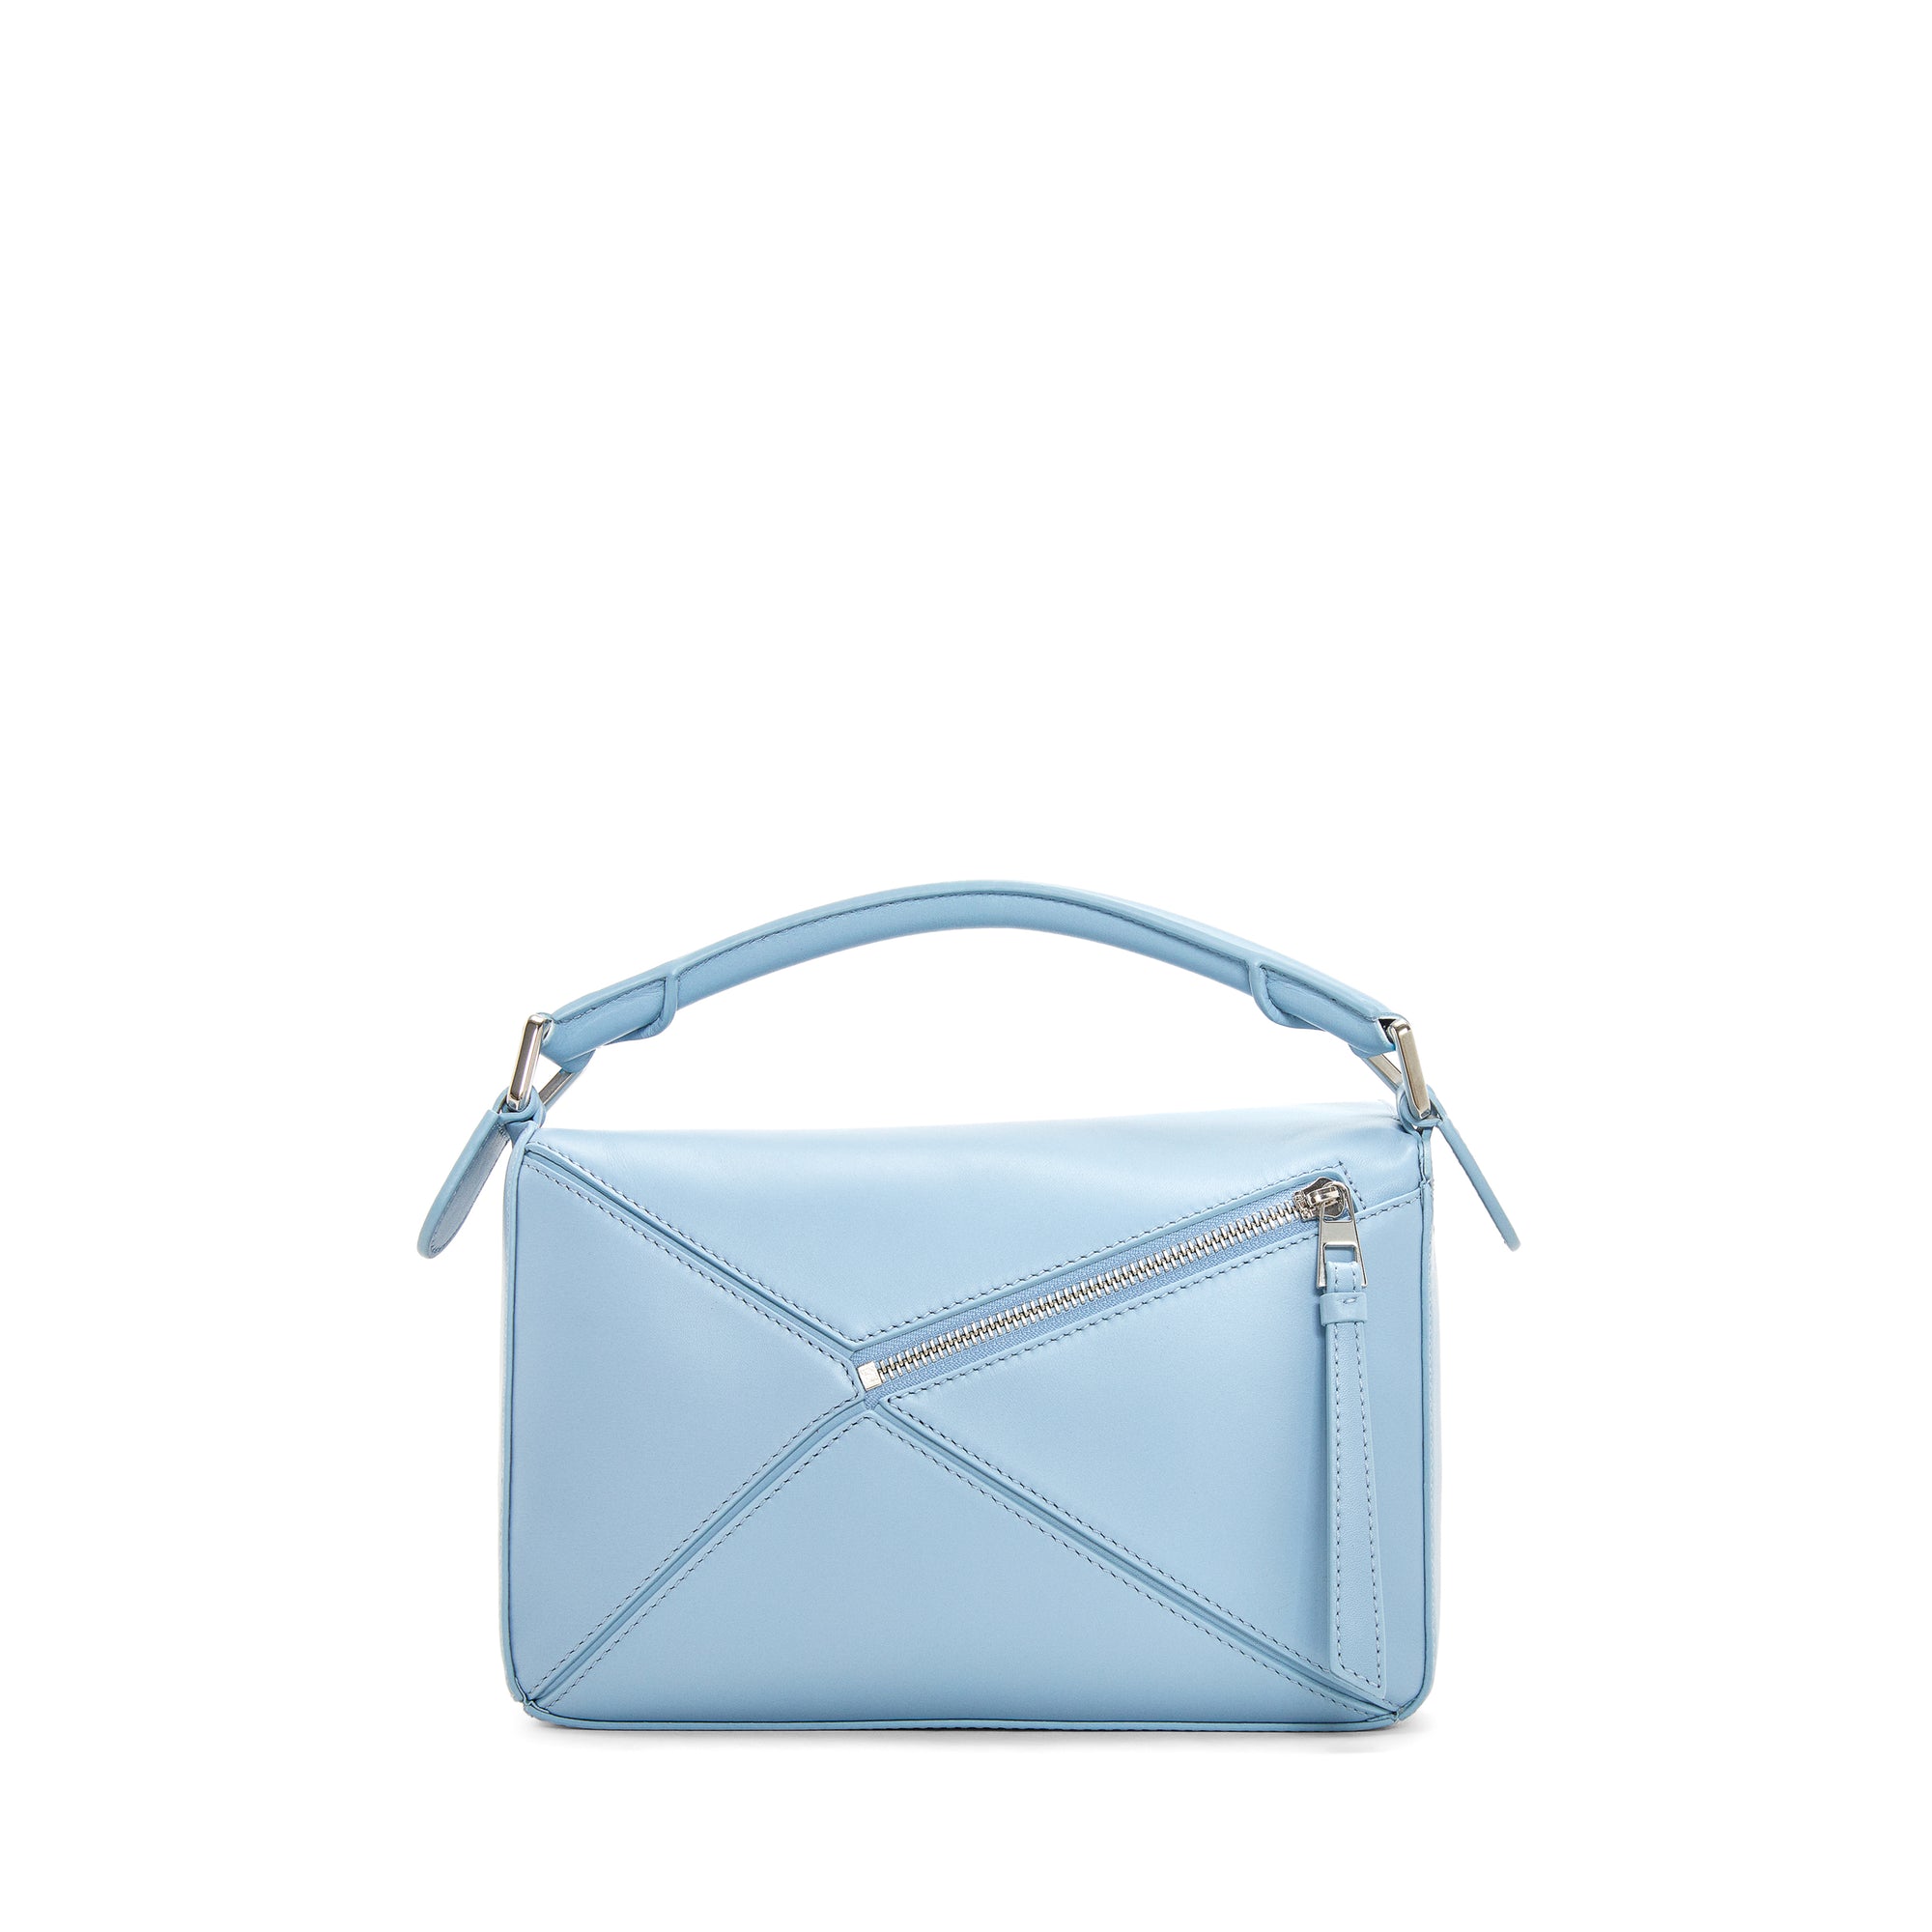 Loewe - Women’s Puzzle Small Bag - (Dusty Blue) view 7